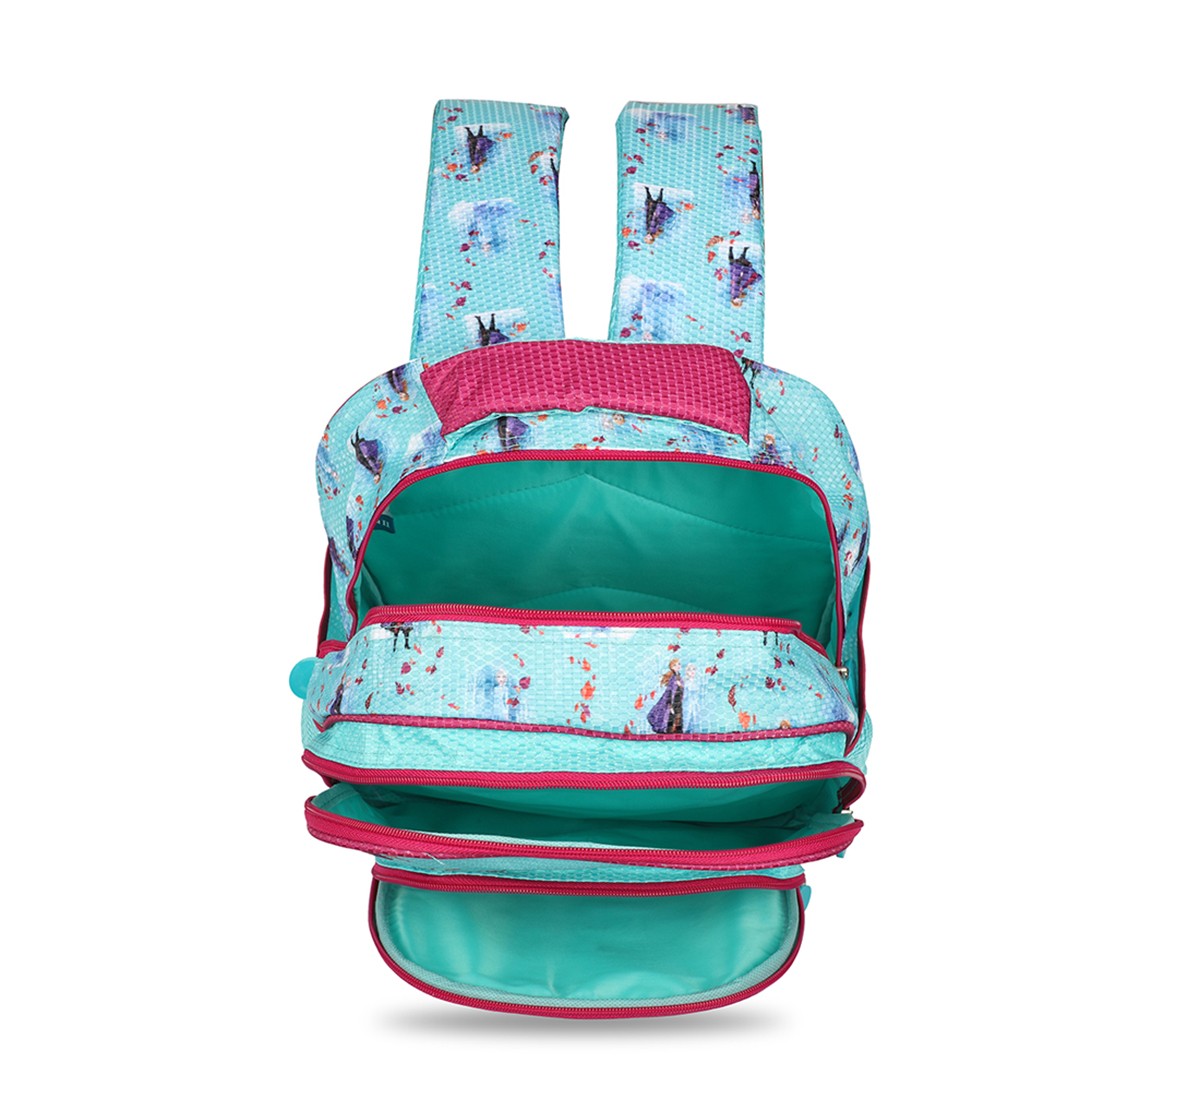 Disney Frozen2 Lead With Courage School Bag 41 Cm Bags for age 7Y+ (Turquoise)